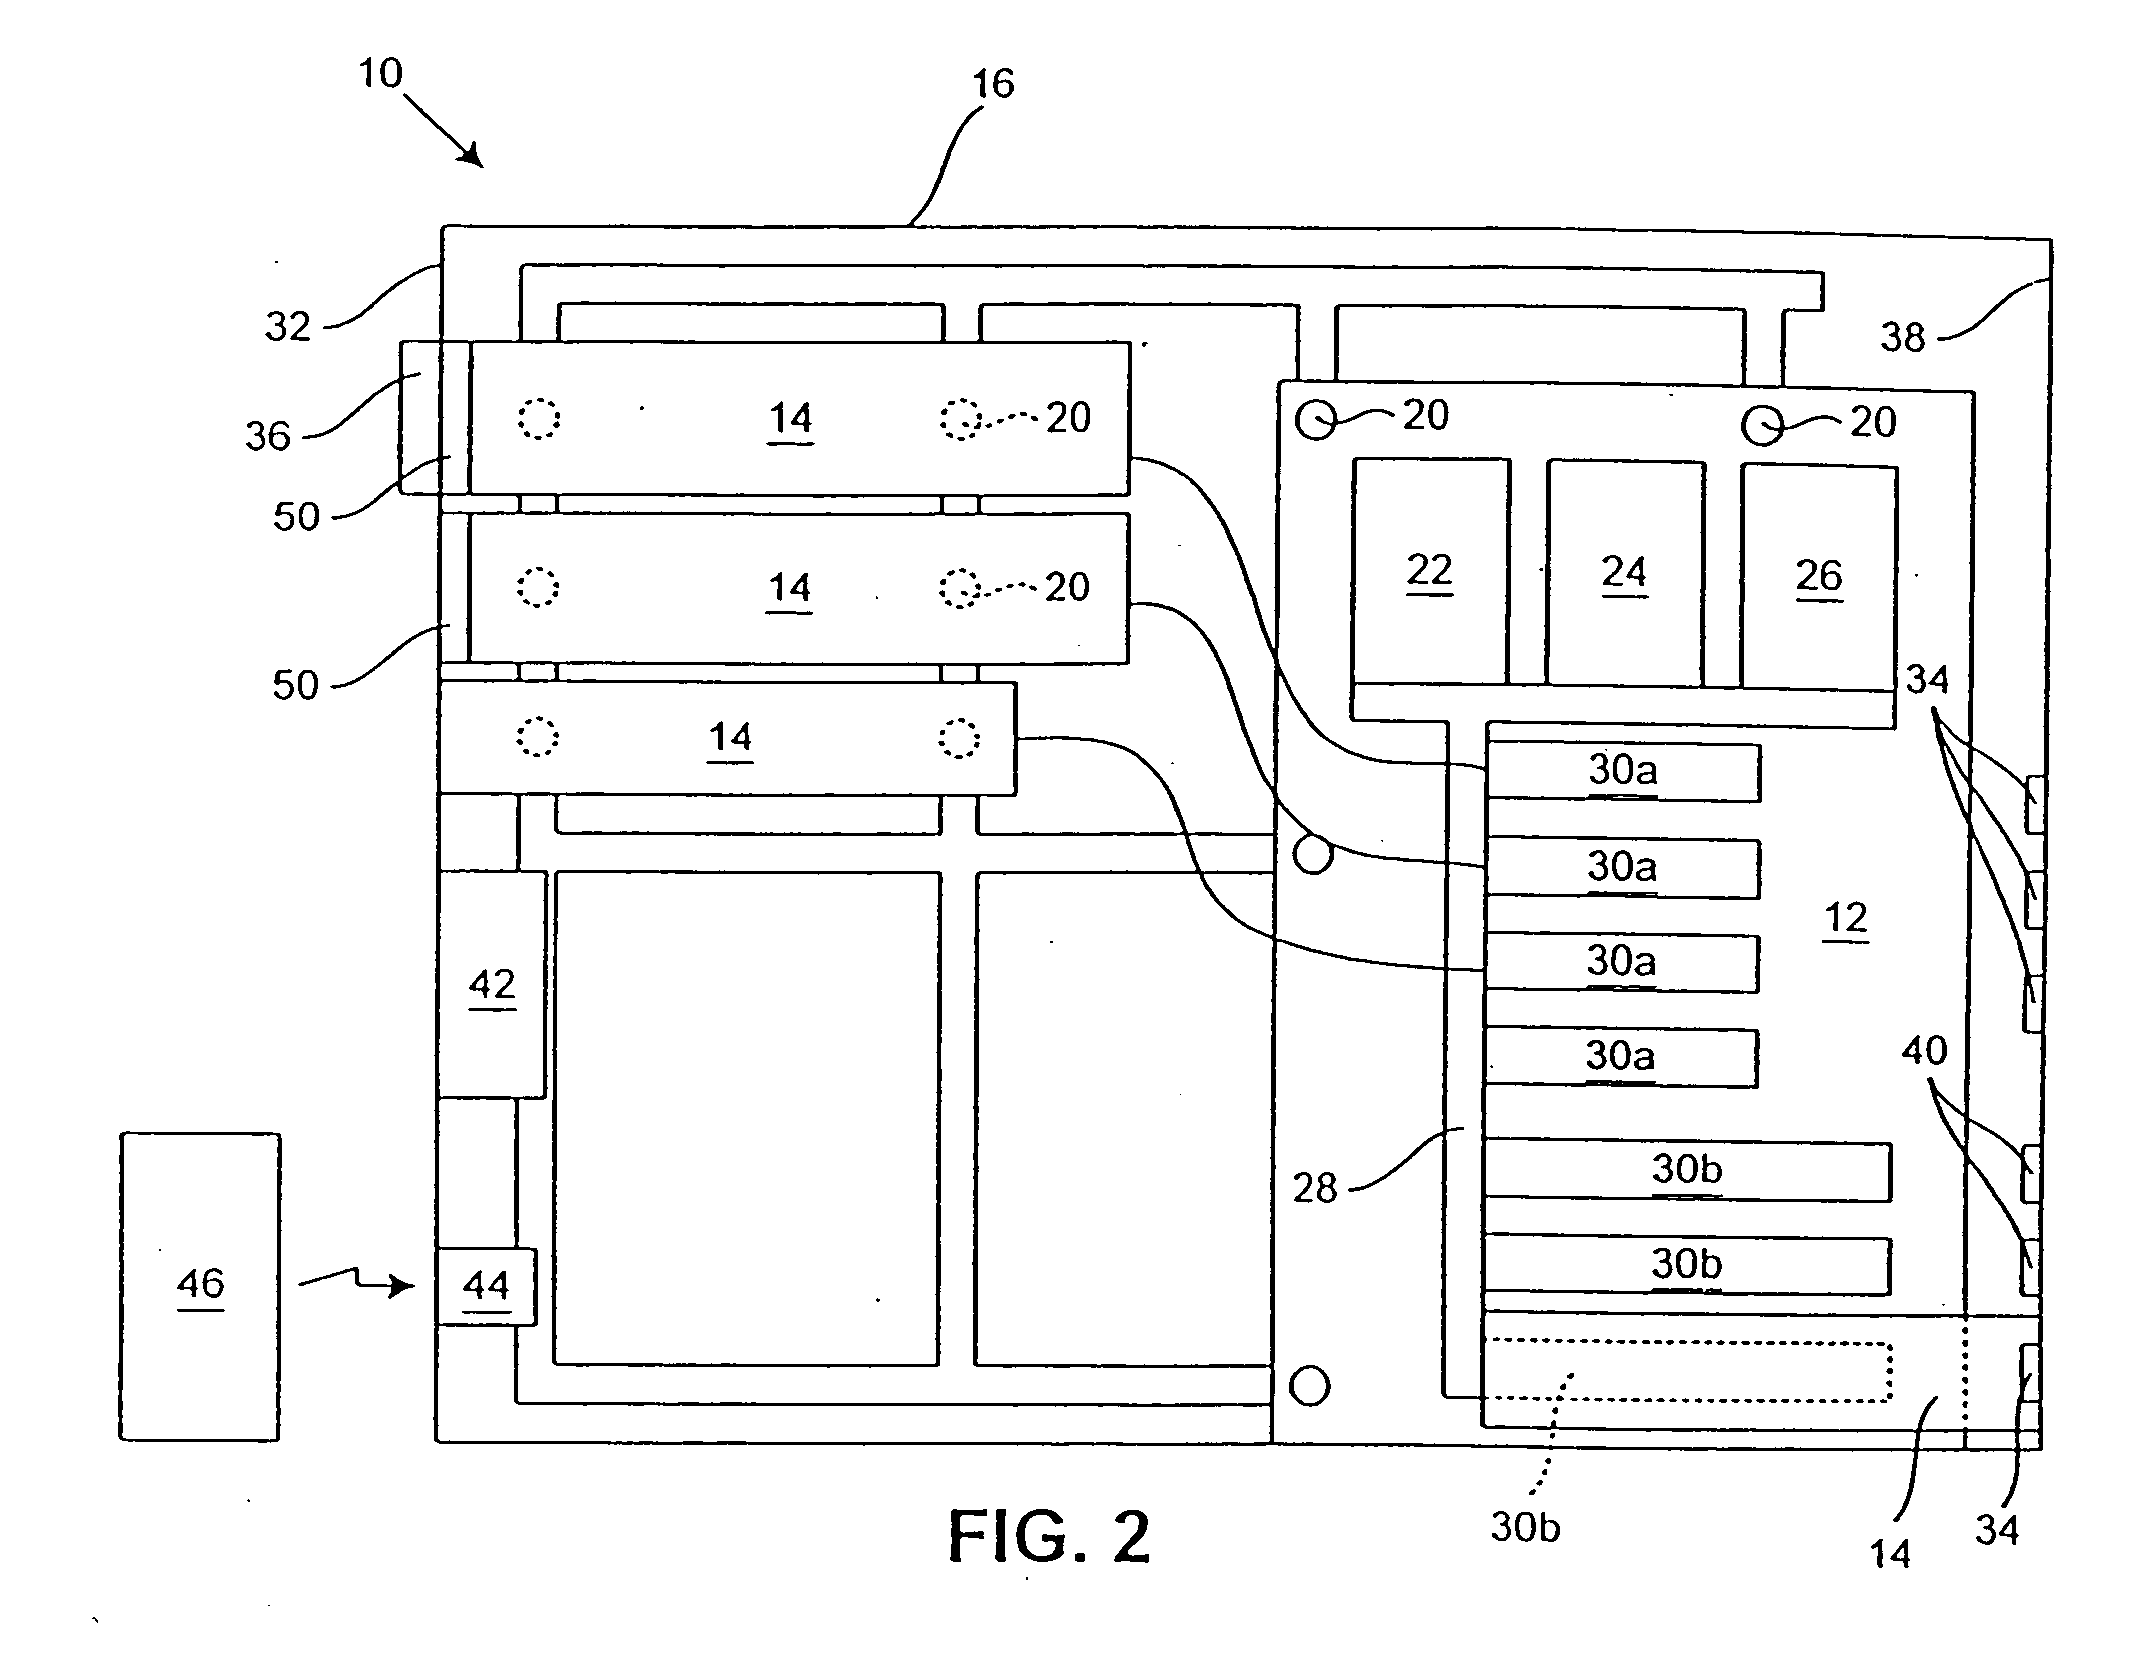 Bi-directional remote control for remotely controllable apparatus